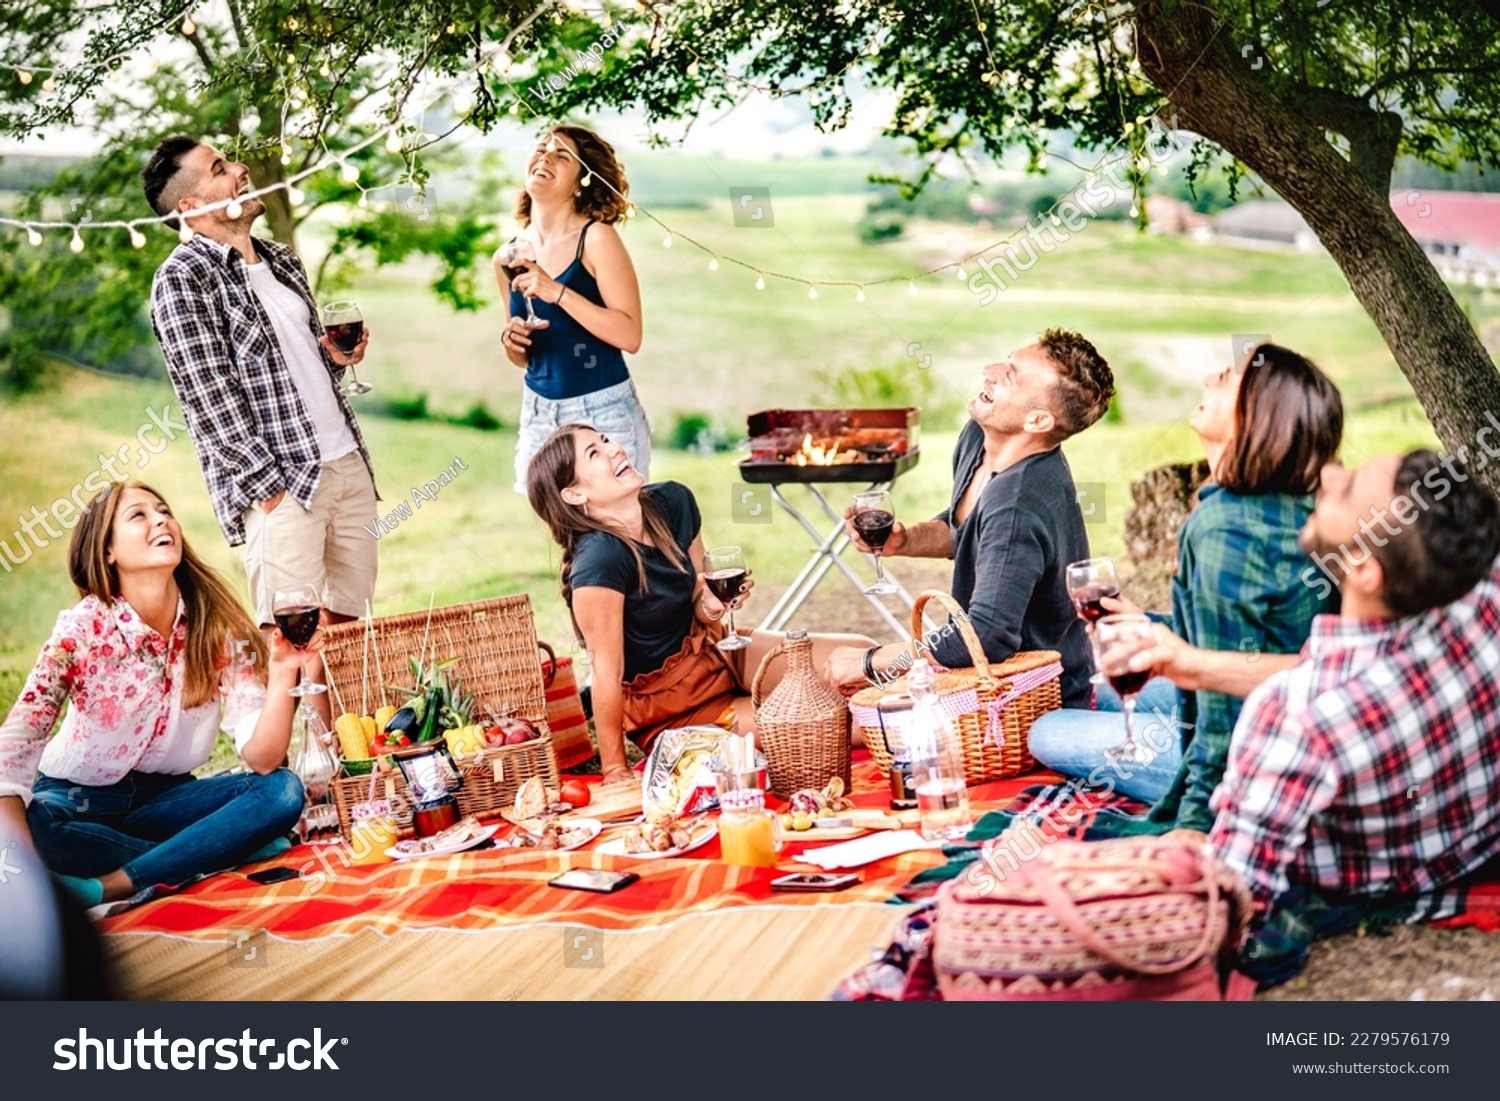 Fancy people laughing at vineyard place after sunset - Food and beverage concept with men and women drinking wine at barbeque party - Happy friends camping at open air pic nic on warm vivid filter #2279576179